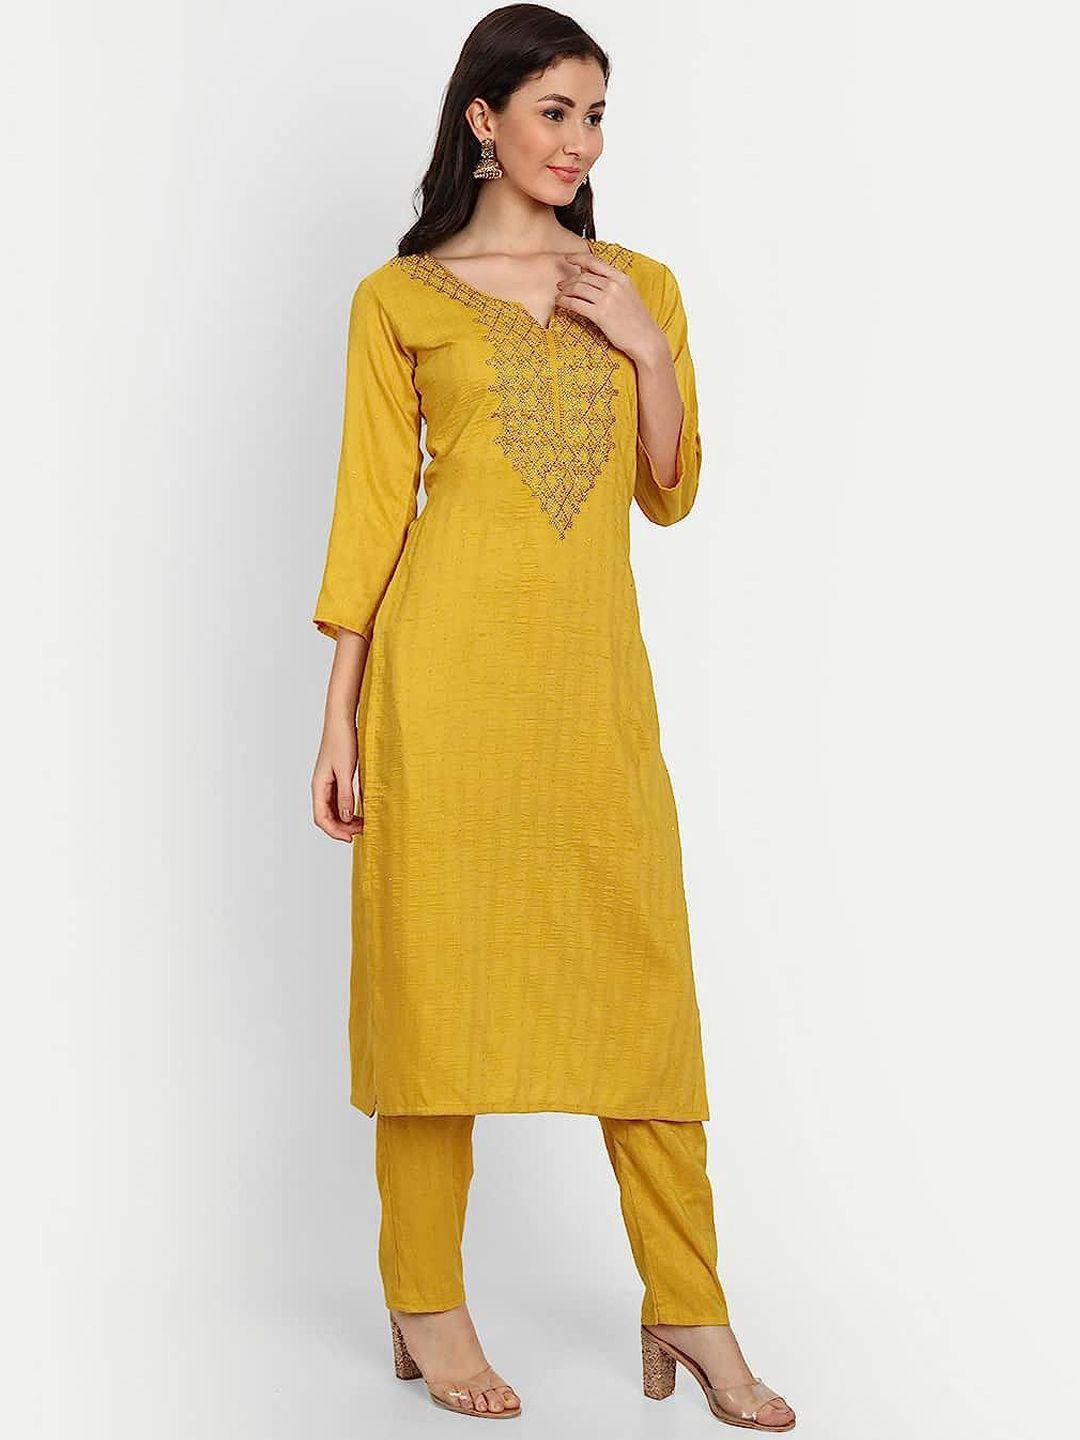 perfectblue embroidered beads and stones kurta with trousers